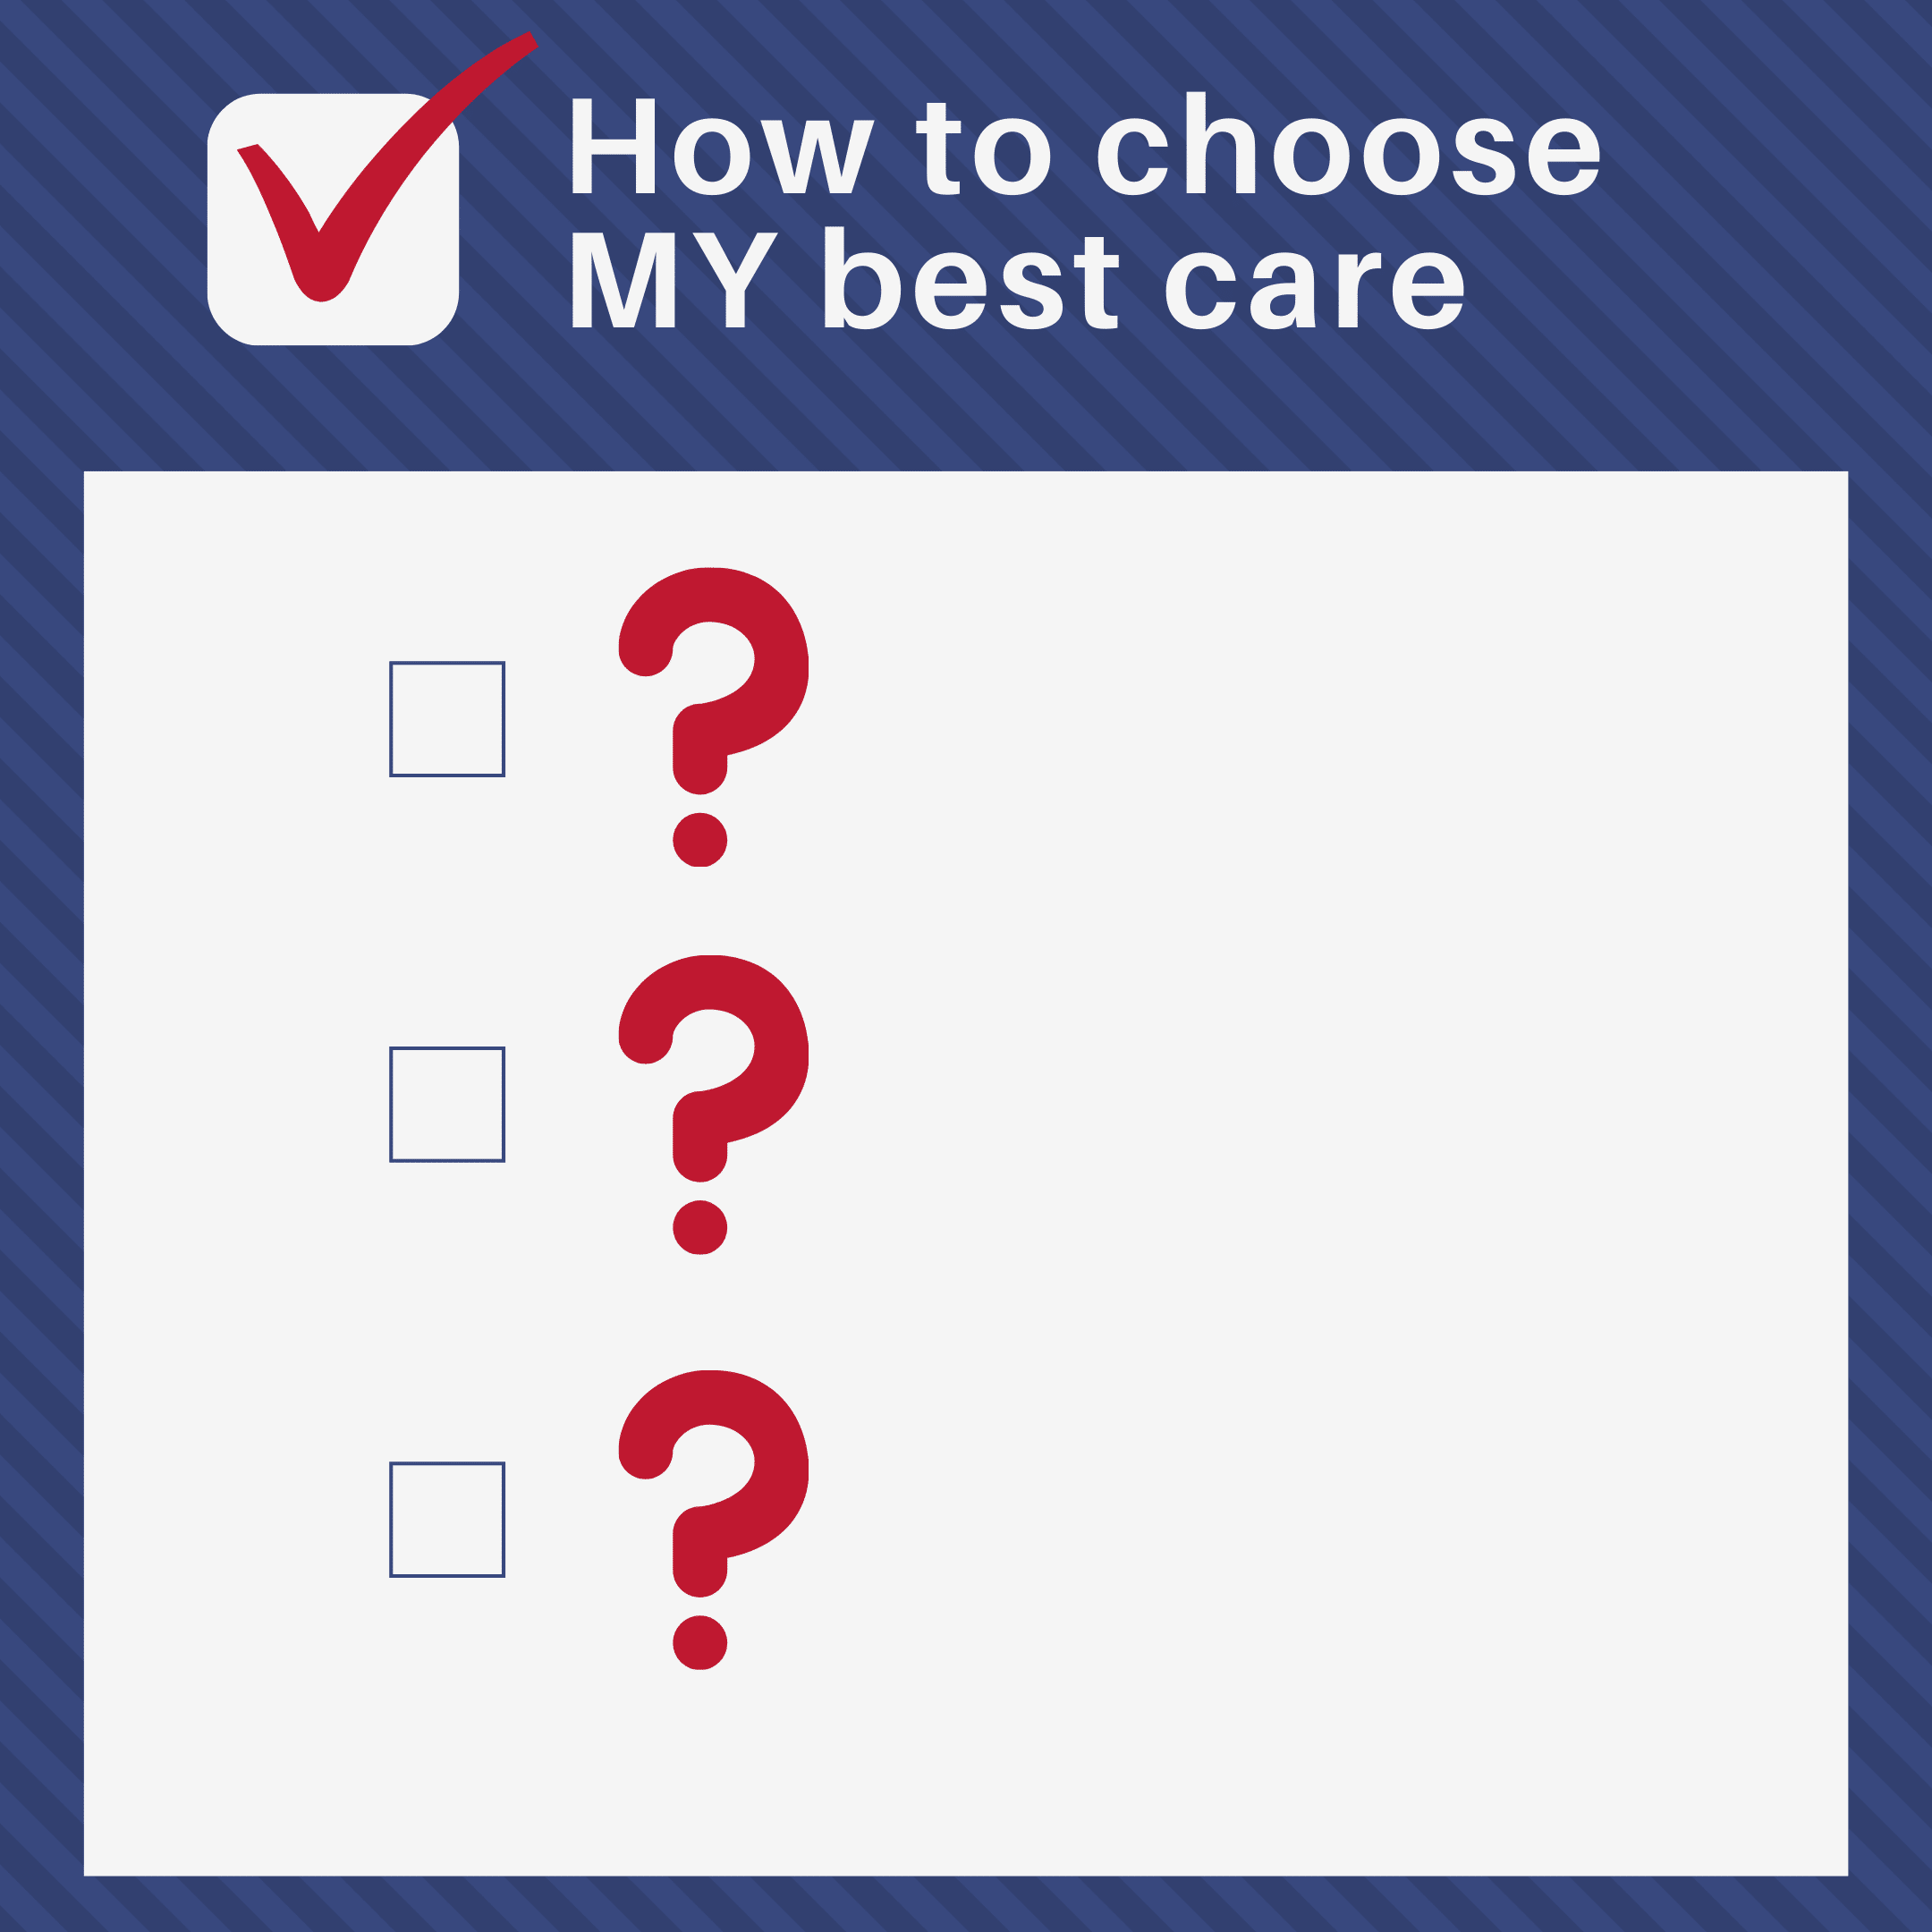 How to choose YOUR best care